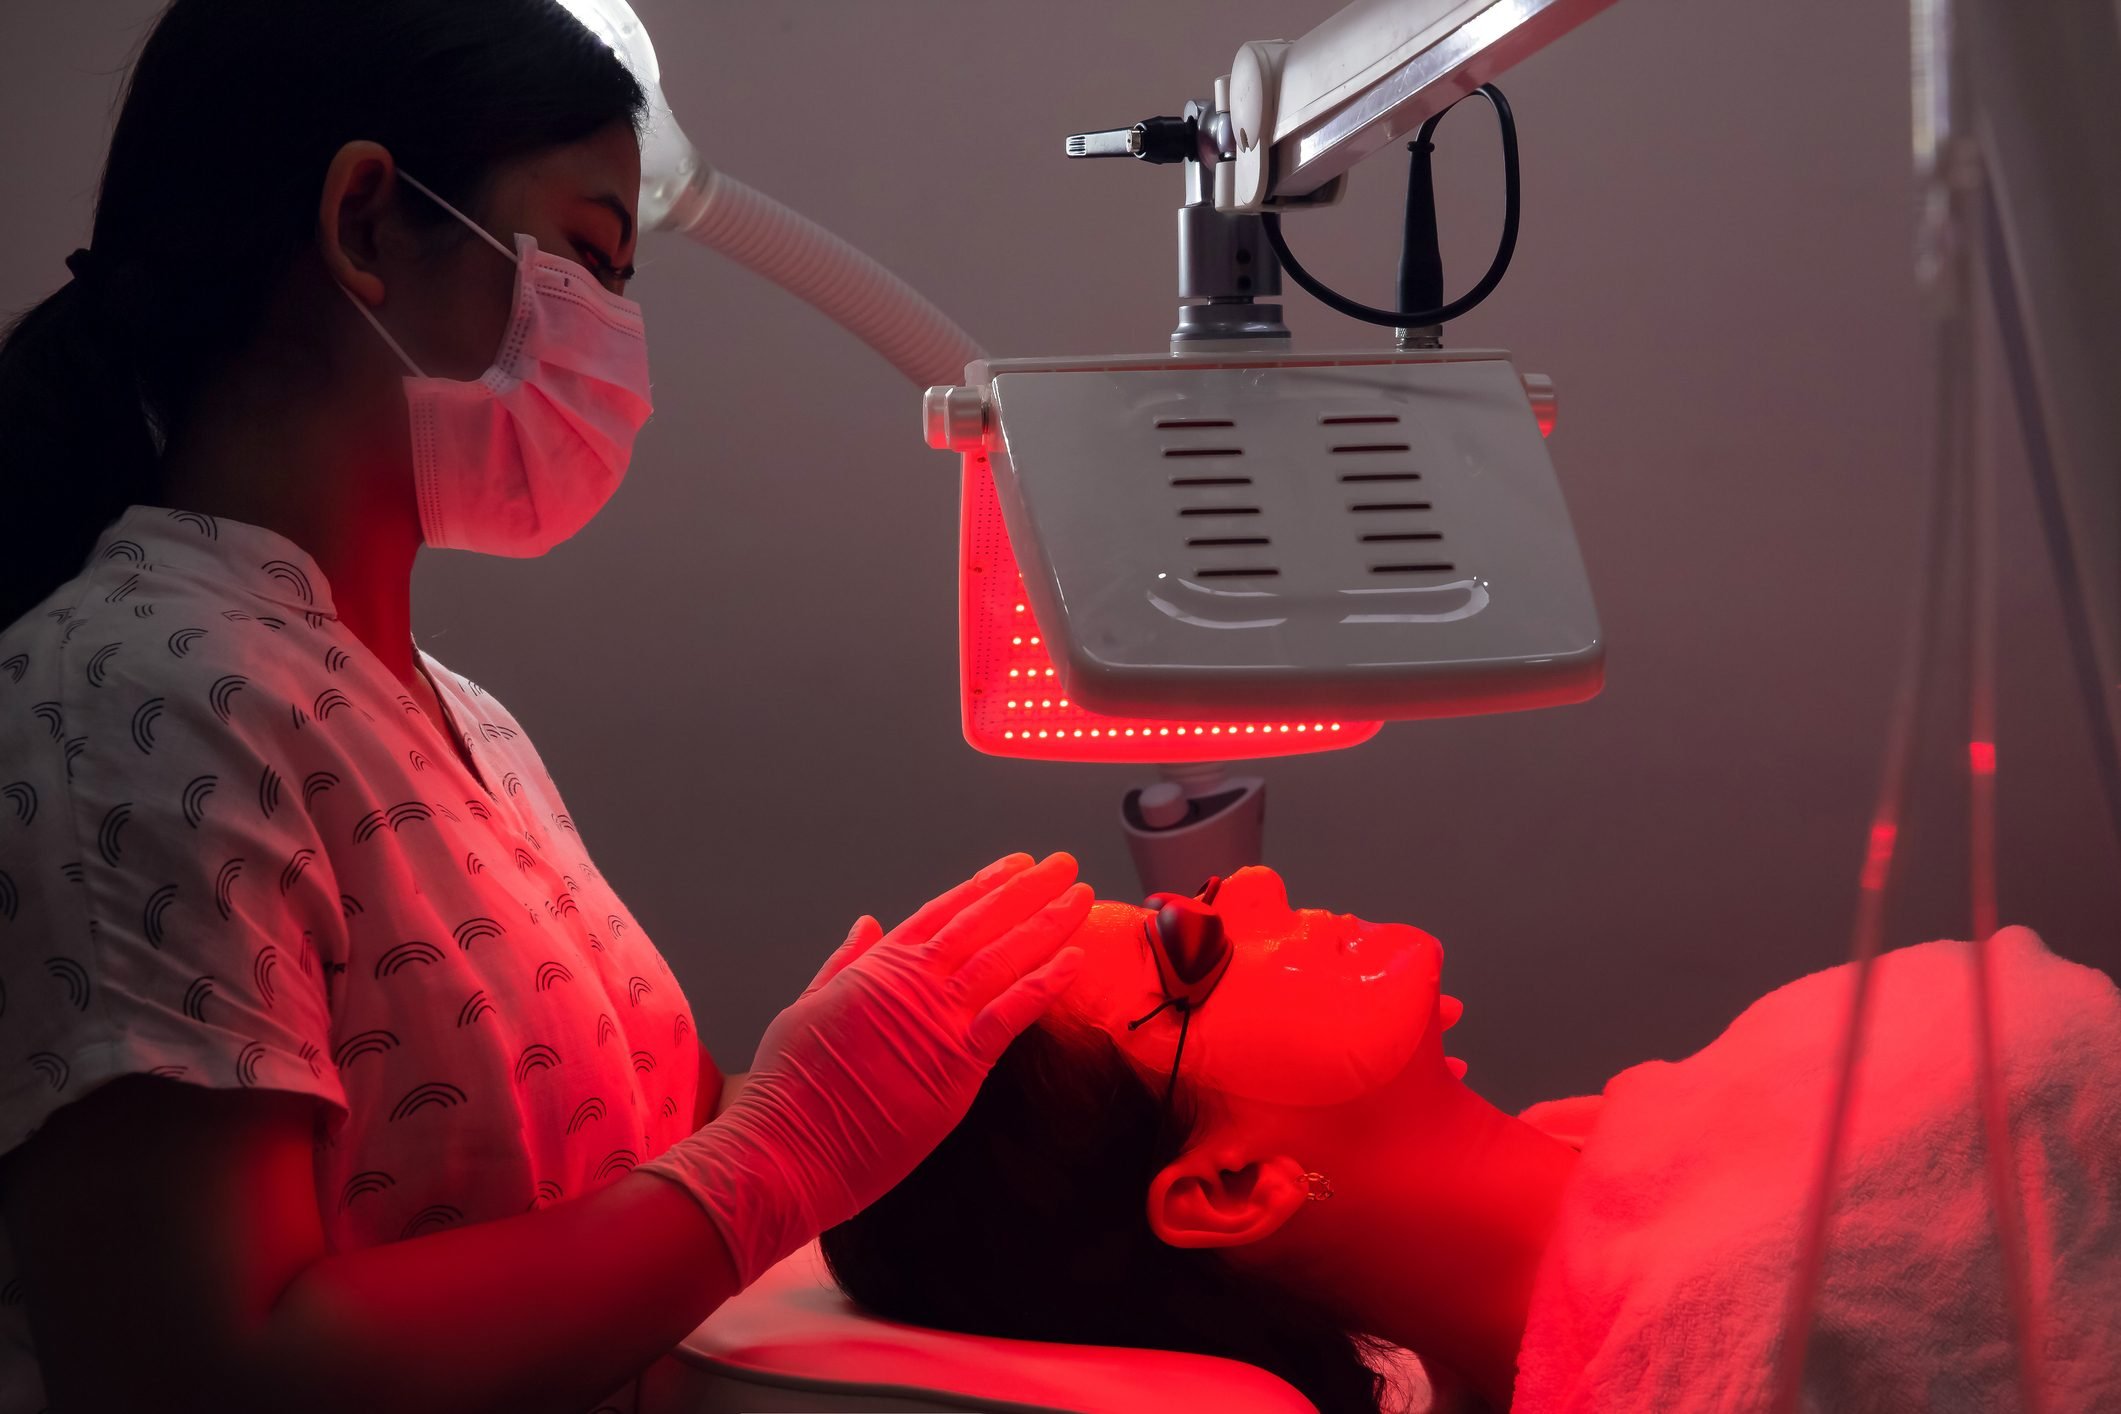 What Is Red Light Therapy? The Benefits and Risks